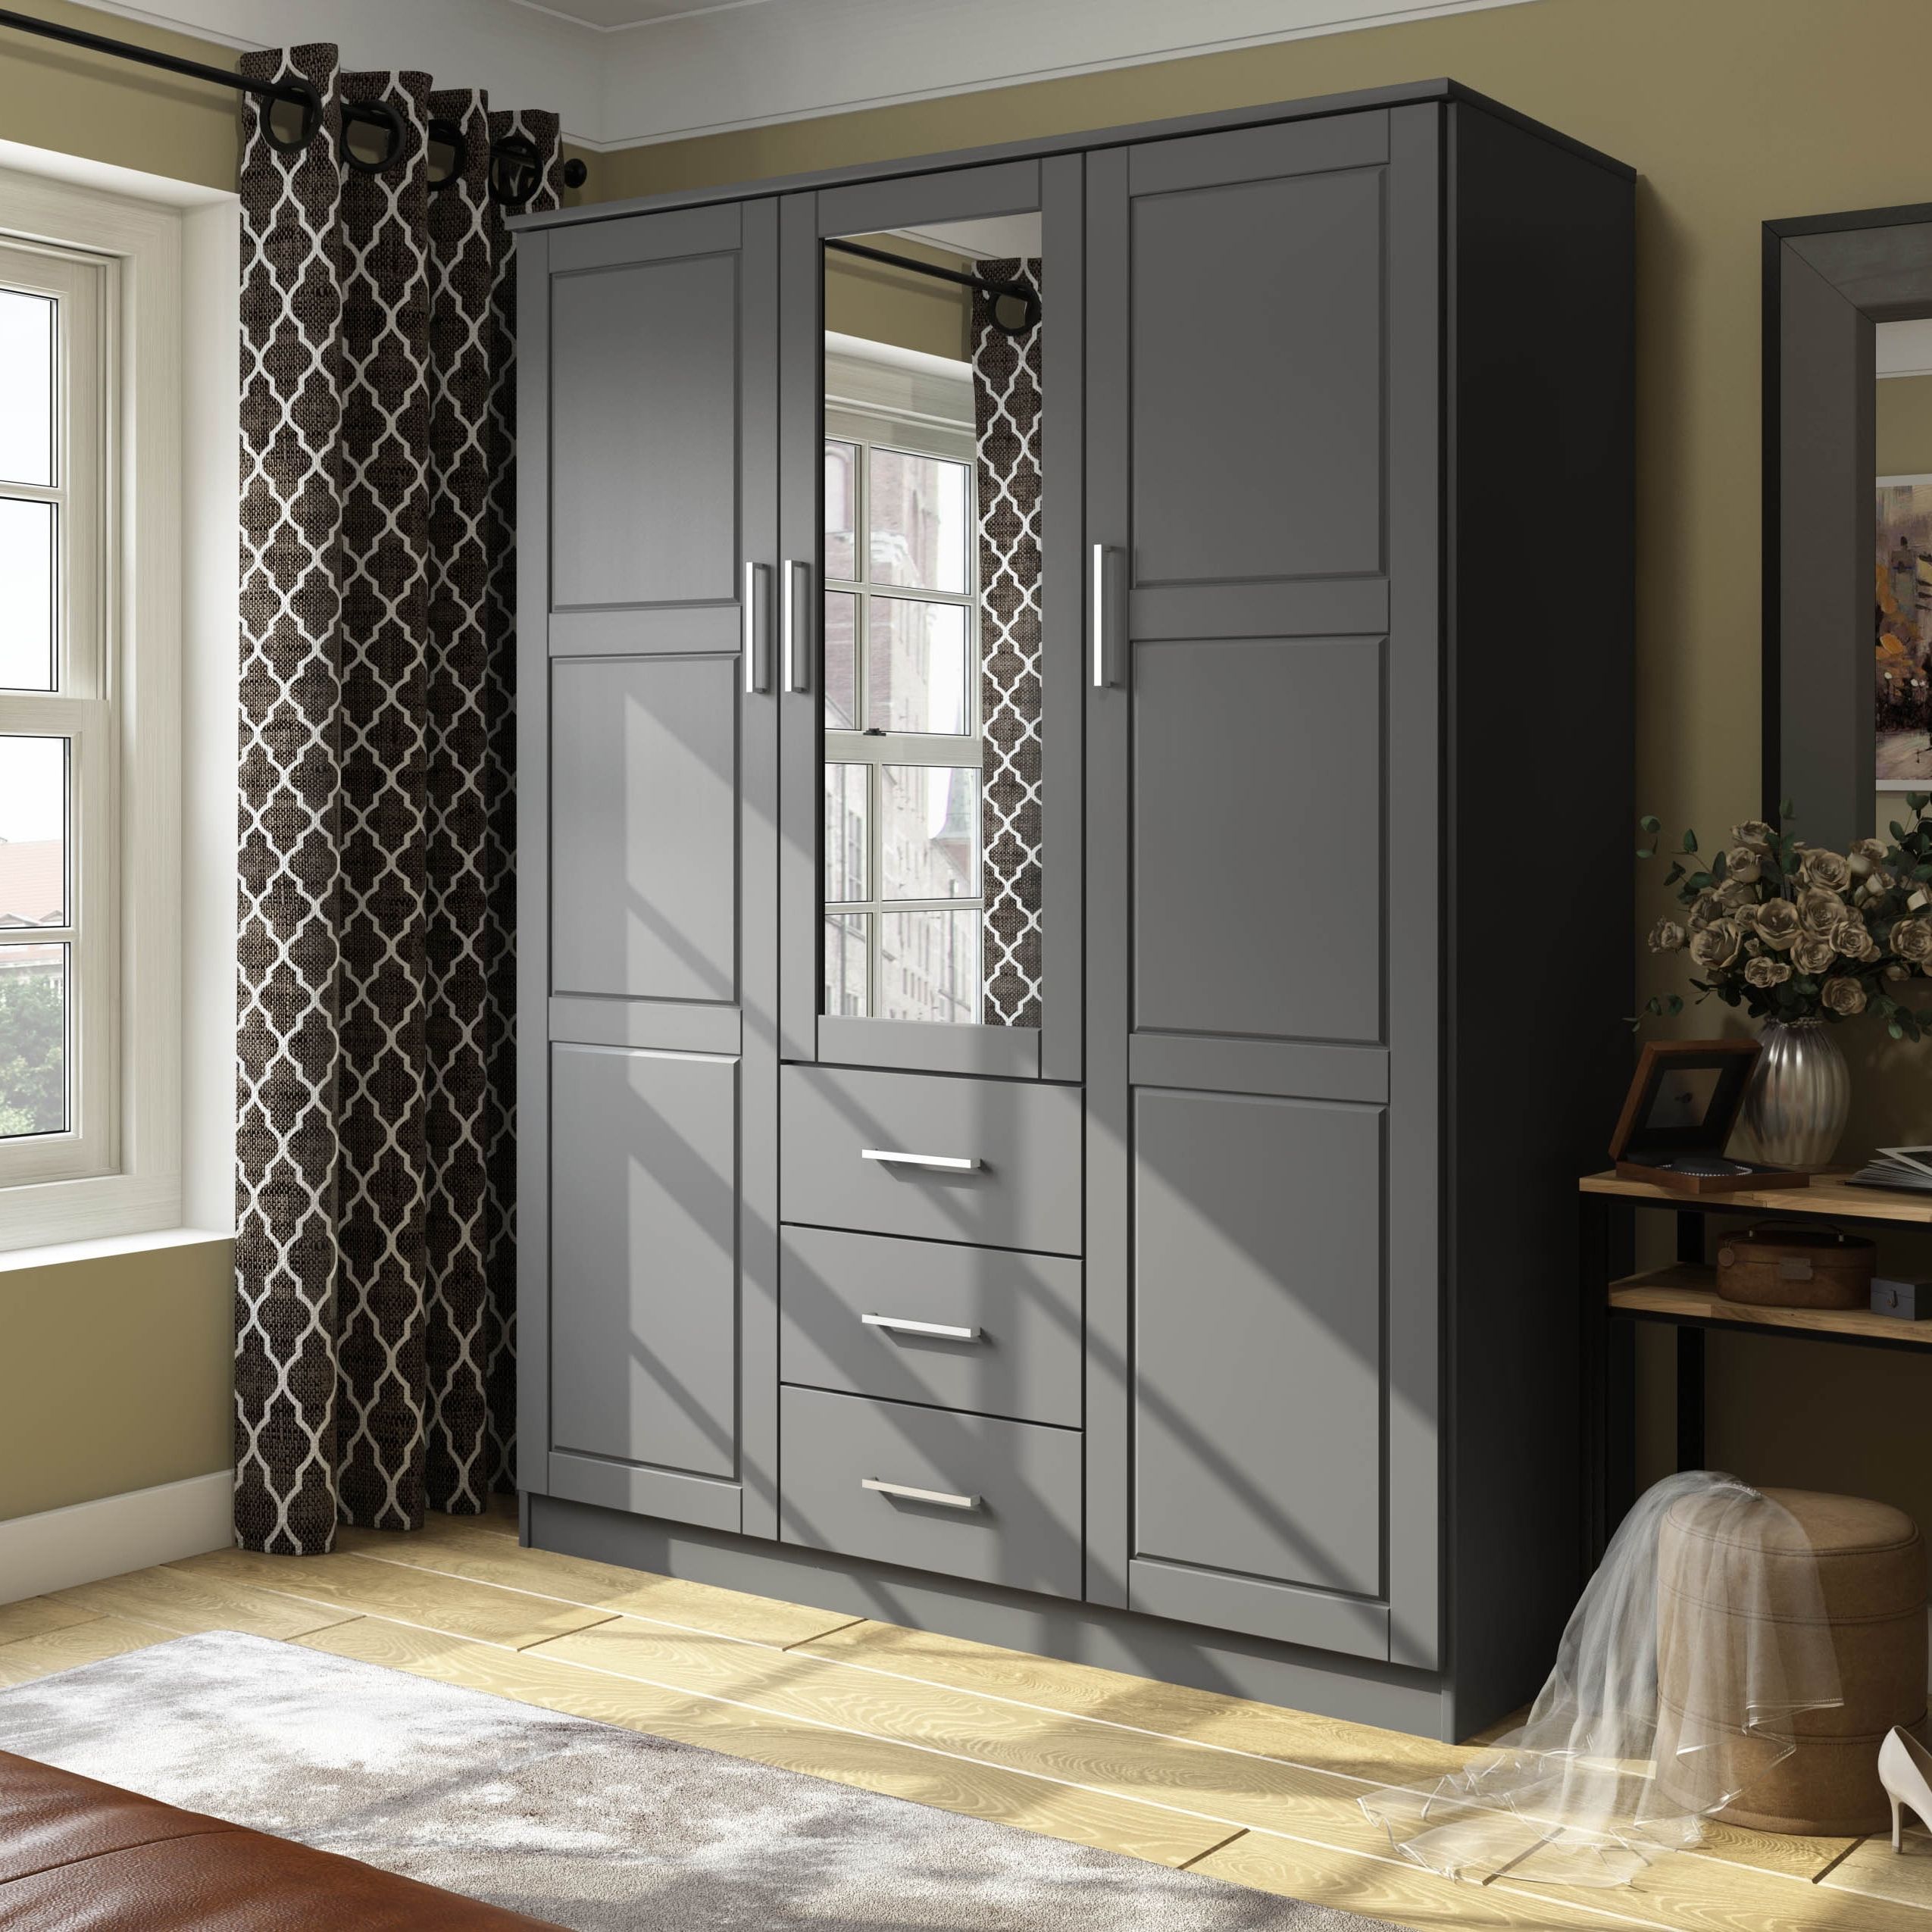 Palace Imports 100% Solid Wood Cosmo 3 Door Wardrobe Armoire With Solid  Wood Or Mirrored Doors – Bed Bath & Beyond – 27120317 With Regard To 3 Door Wardrobes With Drawers And Shelves (View 7 of 20)